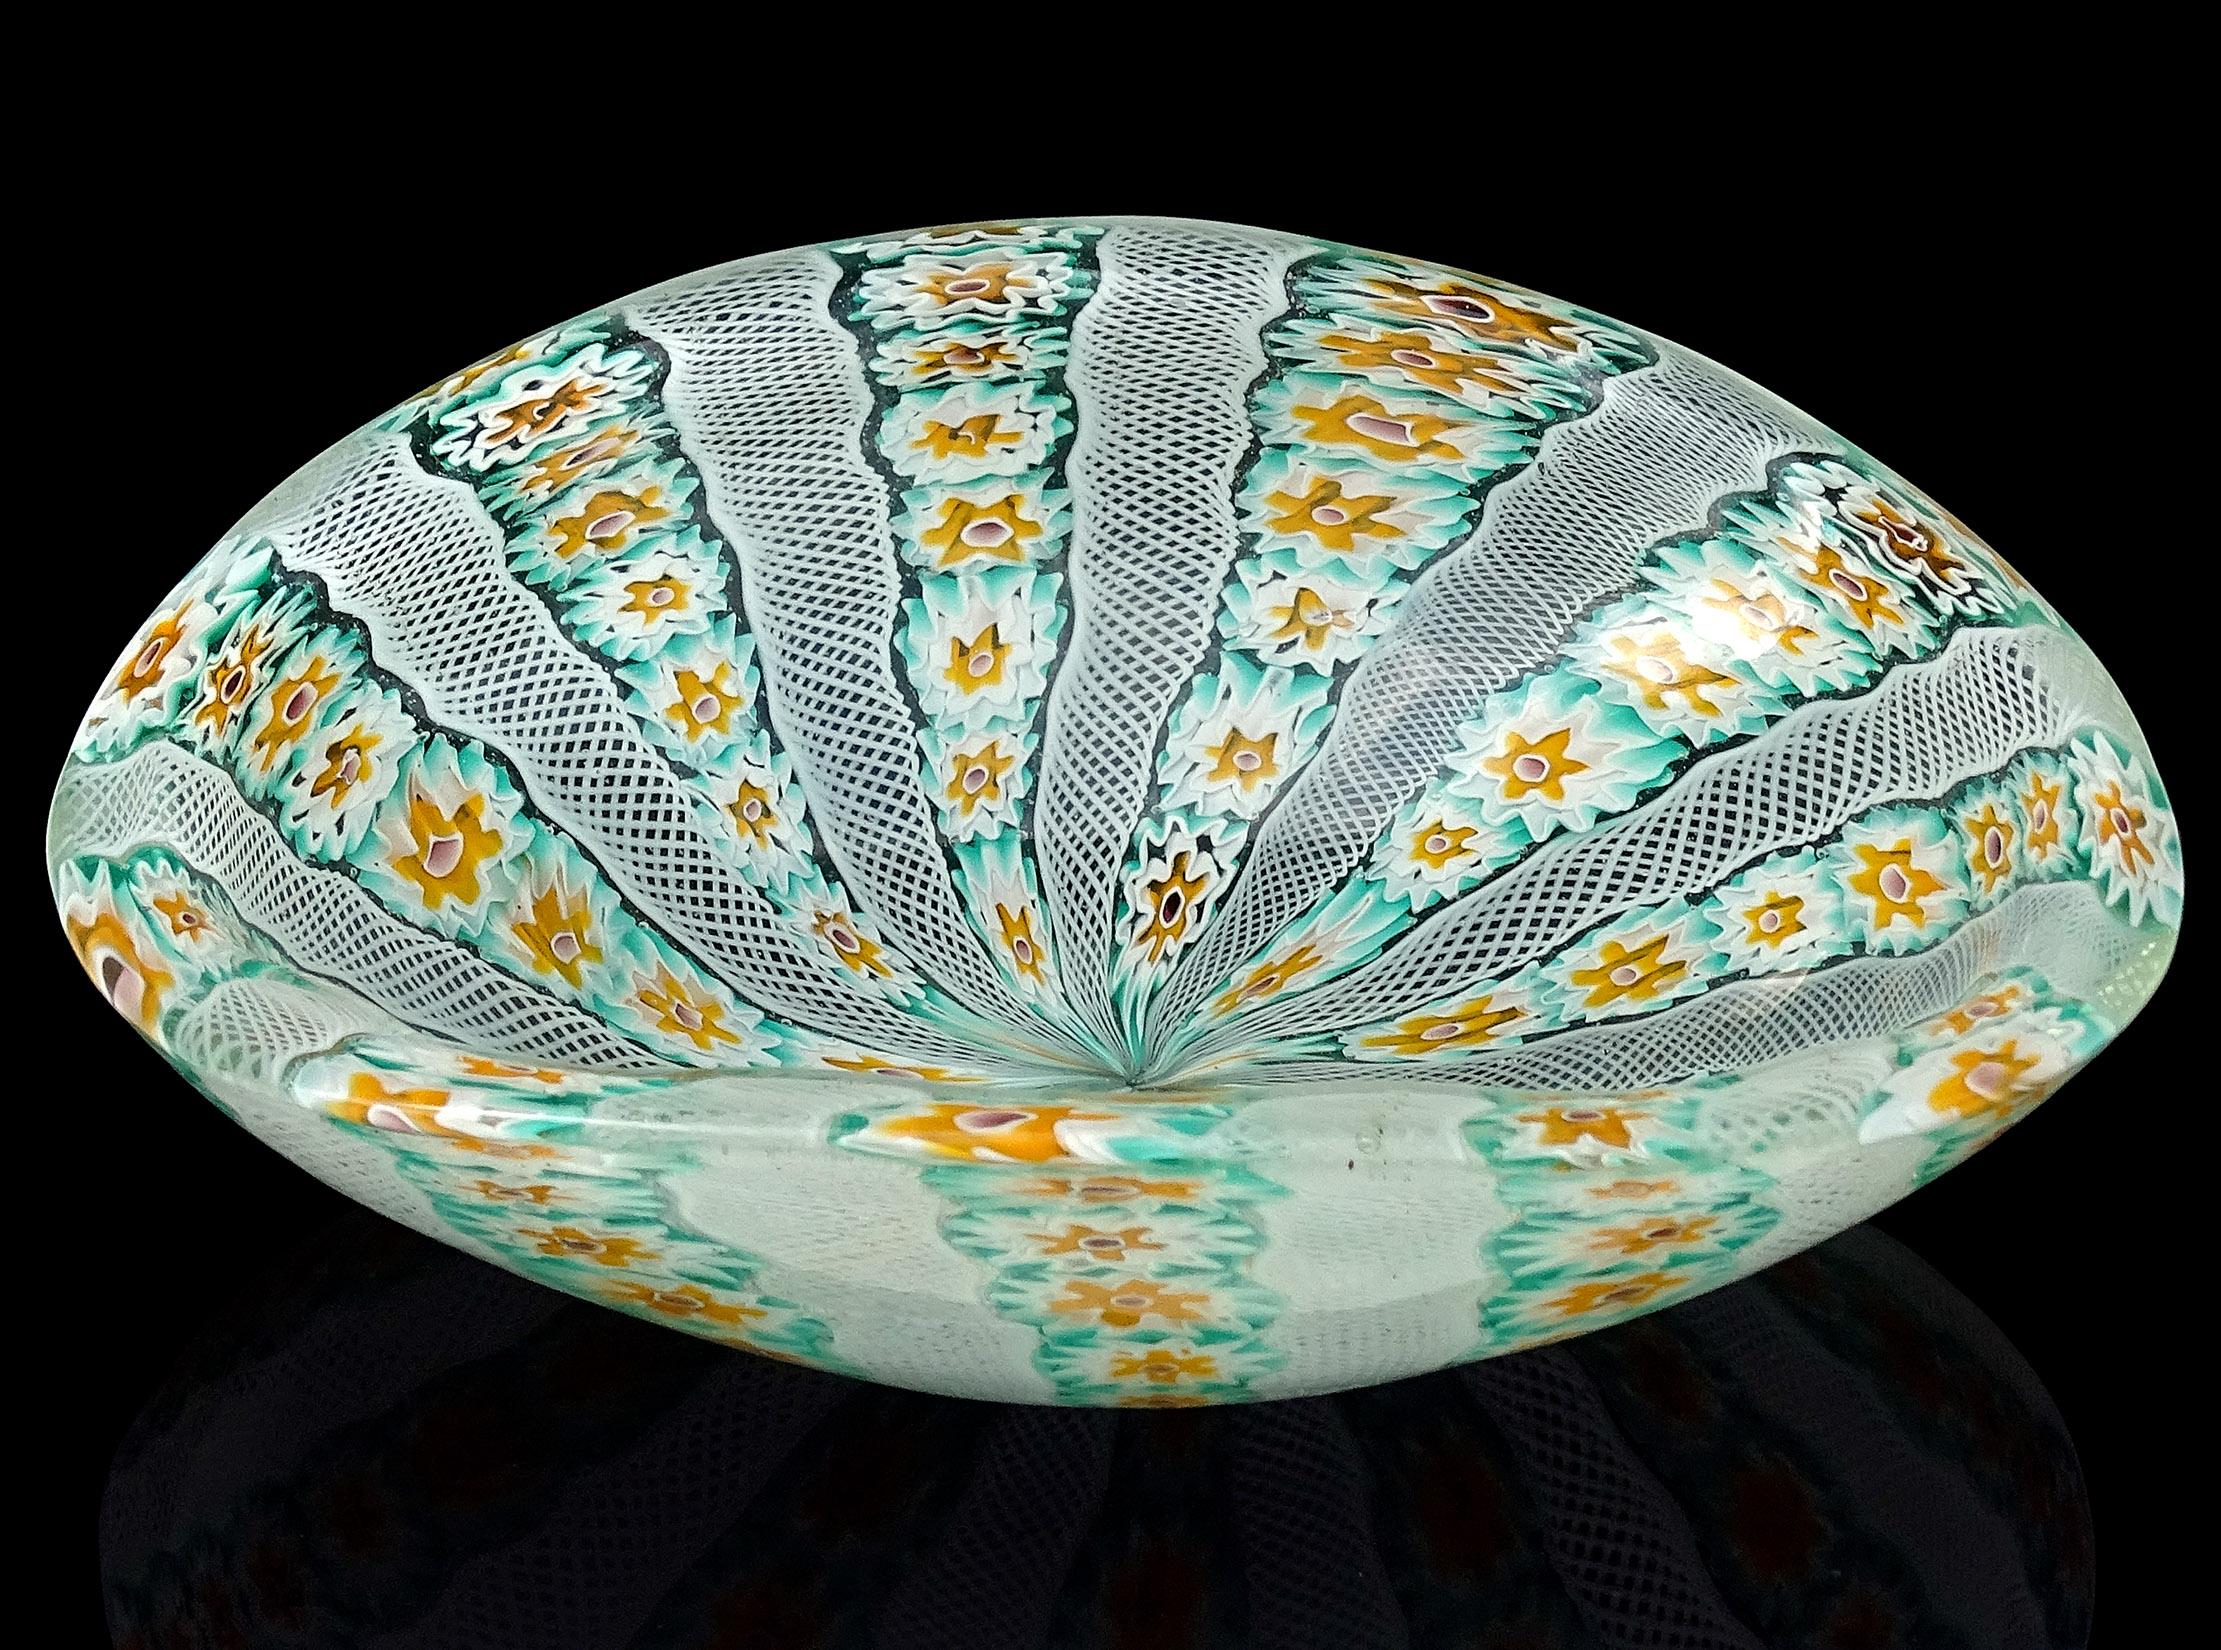 Fratelli Toso Murano Millefiori Flower Ribbons Italian Art Glass Decorative Bowl In Good Condition For Sale In Kissimmee, FL